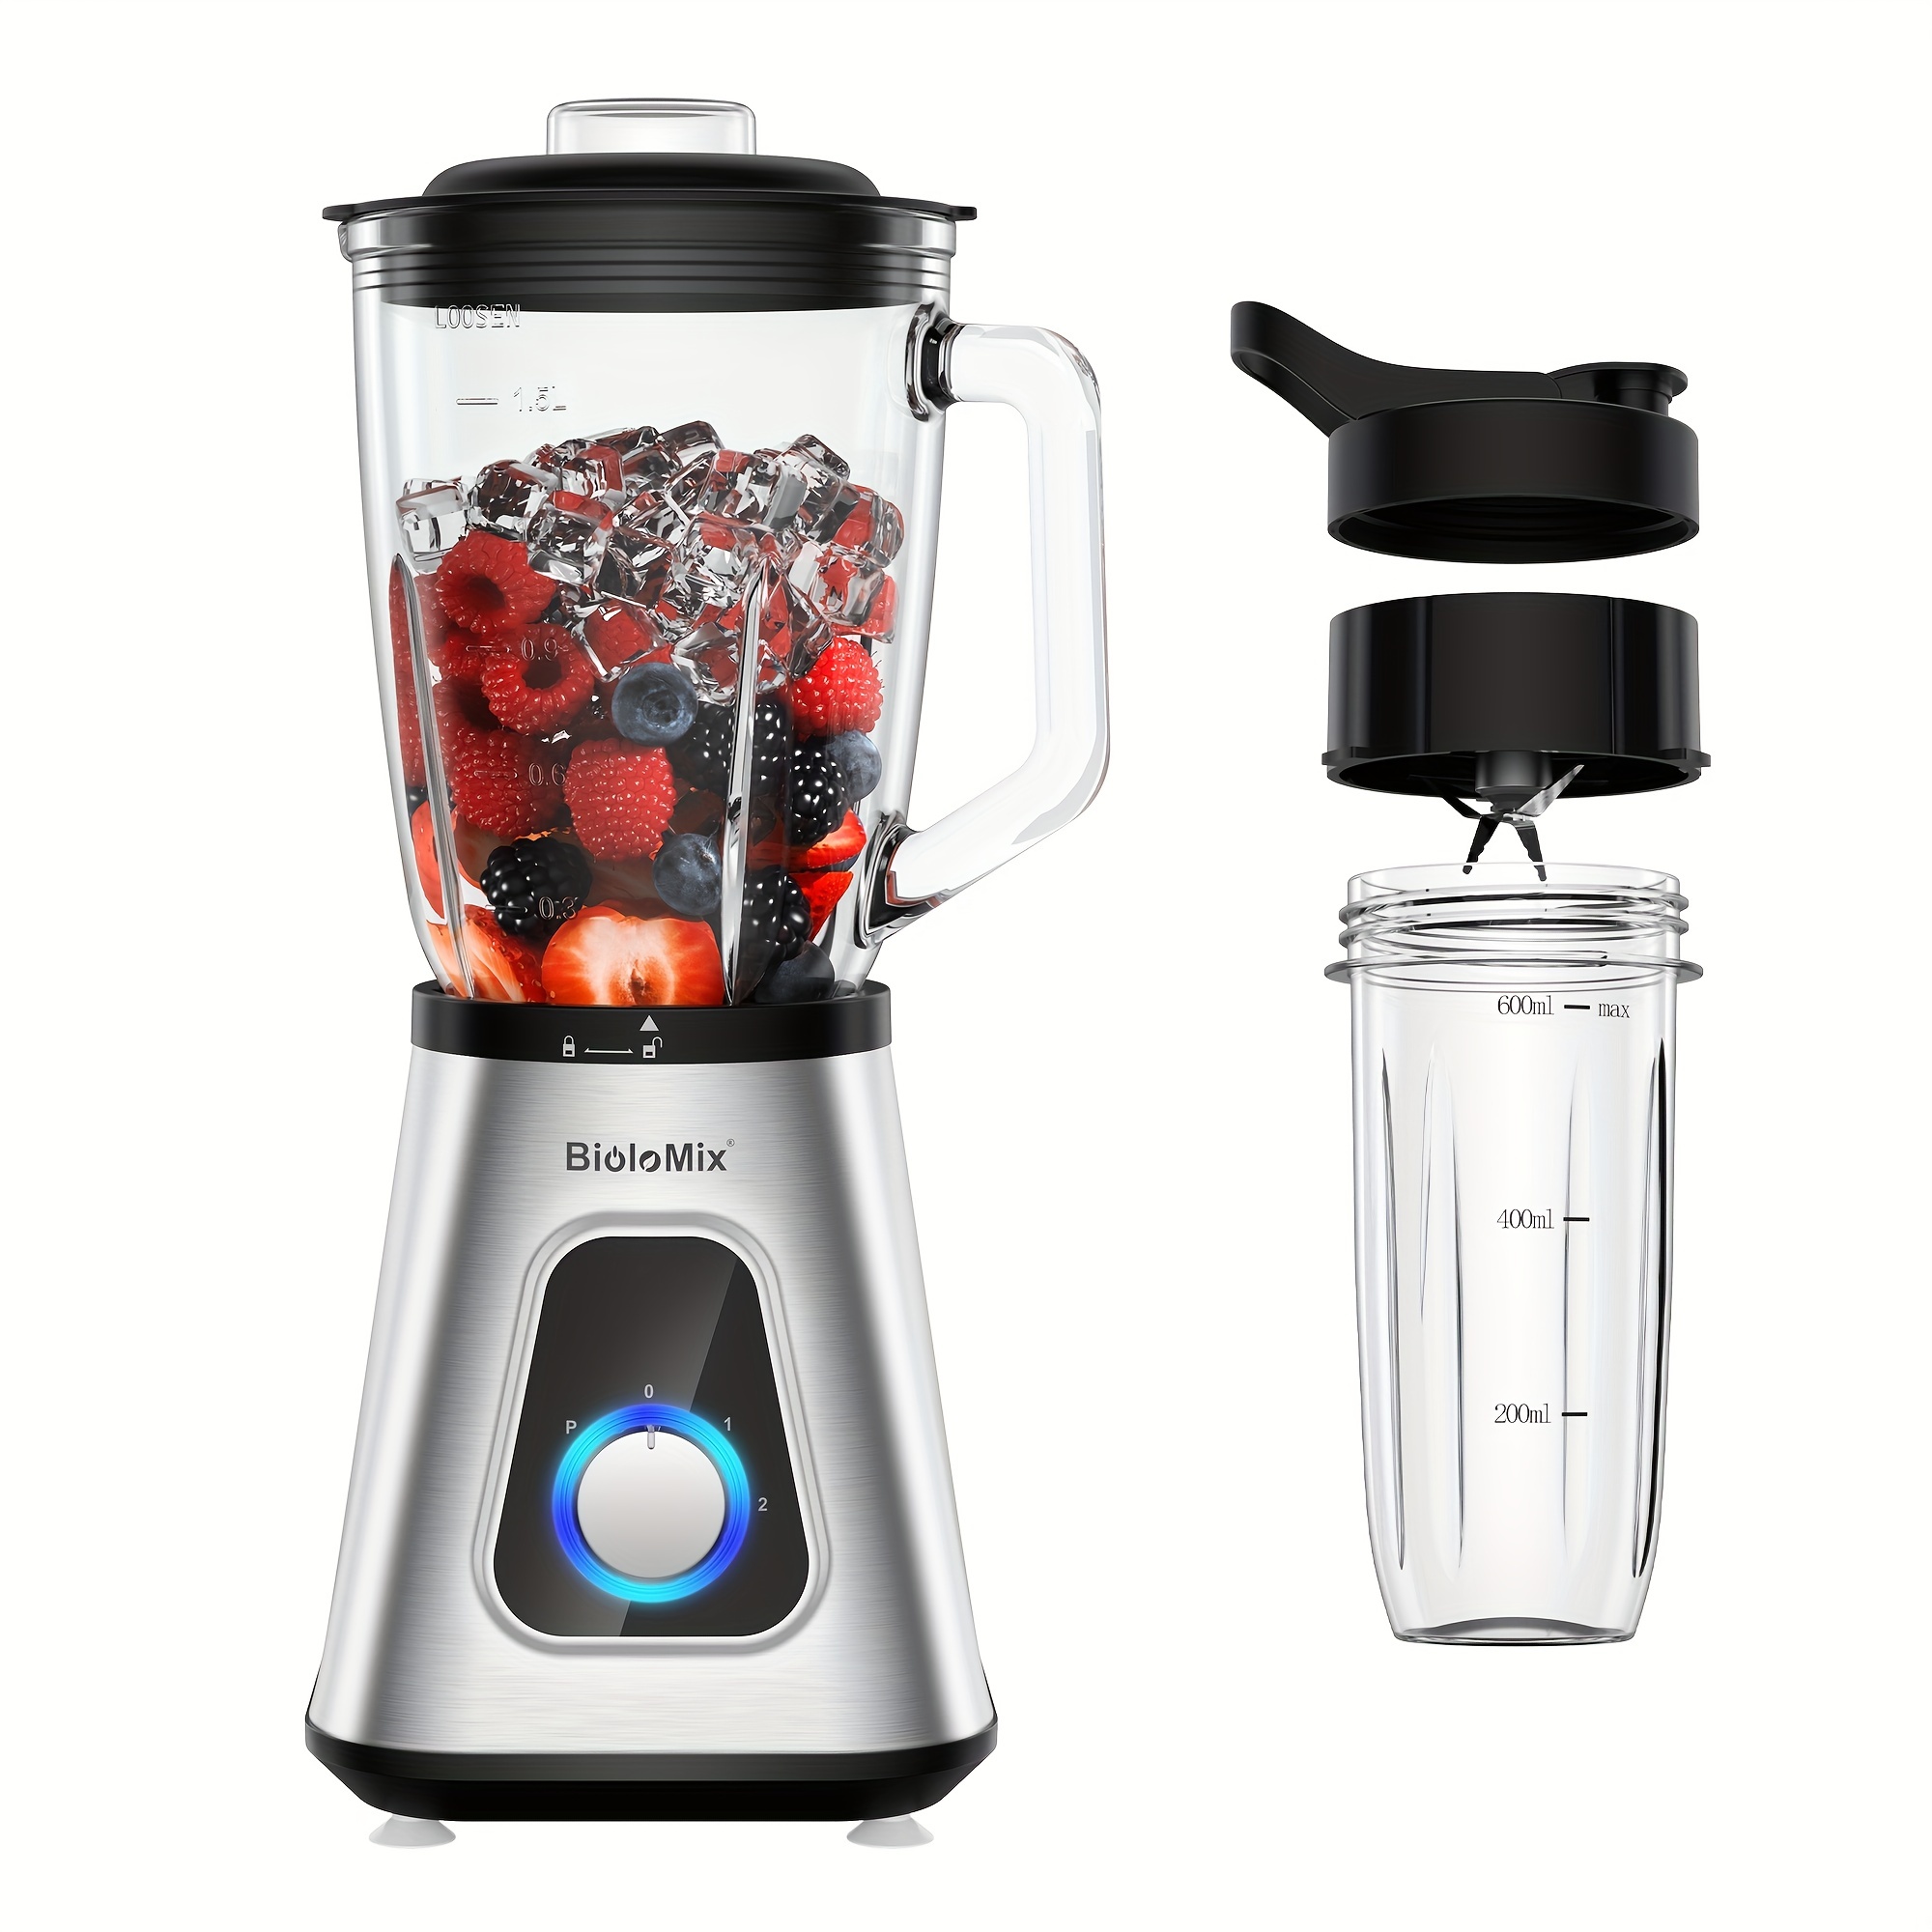 3 in 1 Turborcrush blender  BUCHYMIX BLENDER is a must have by